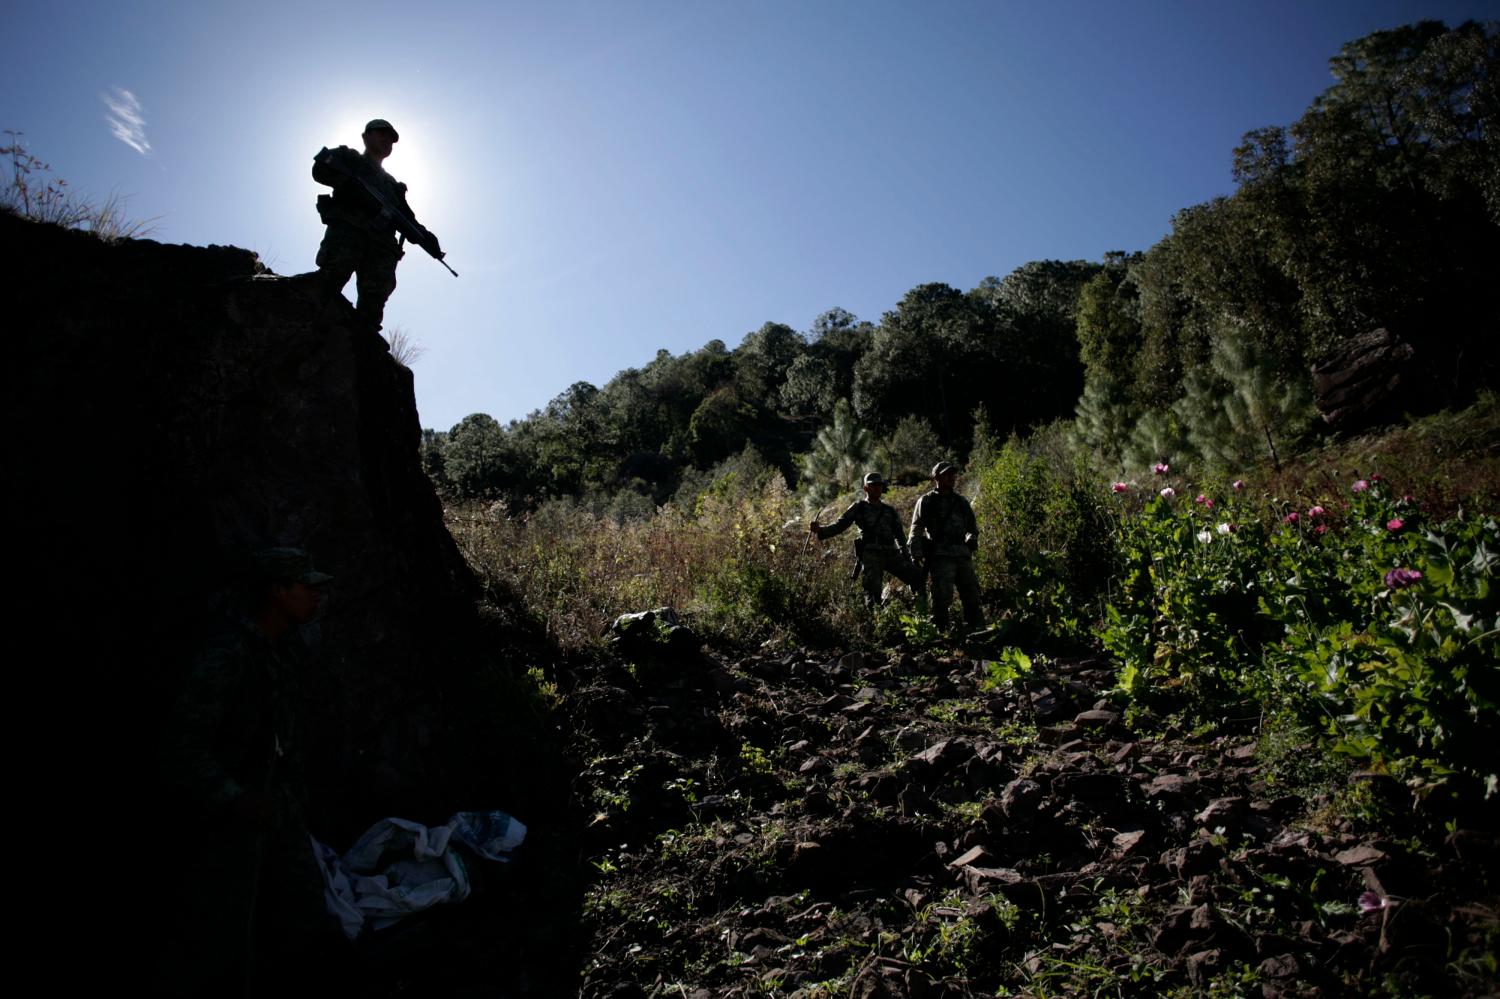 Soldiers patrol at a poppy plantation used to make heroin during an operation of destruction at Sierra de Culiacan in state of Sinaloa, December 8, 2011. High above Mexico's drug-producing heartland, Mexican soldiers are combing the fertile fields of the northwestern state of Sinaloa in search of the billion-dollar poppy and marijuana farms that litter the region. In the operative the Mexican troops destroyed packed marijuana as well as bundles of the plant for processing, accounting for over 100 tonnes, according Army Commander General, Moises Melo. Picture taken December 8, 2011. REUTERS/Bernardo Montoya (MEXICO - Tags: DRUGS SOCIETY MILITARY)